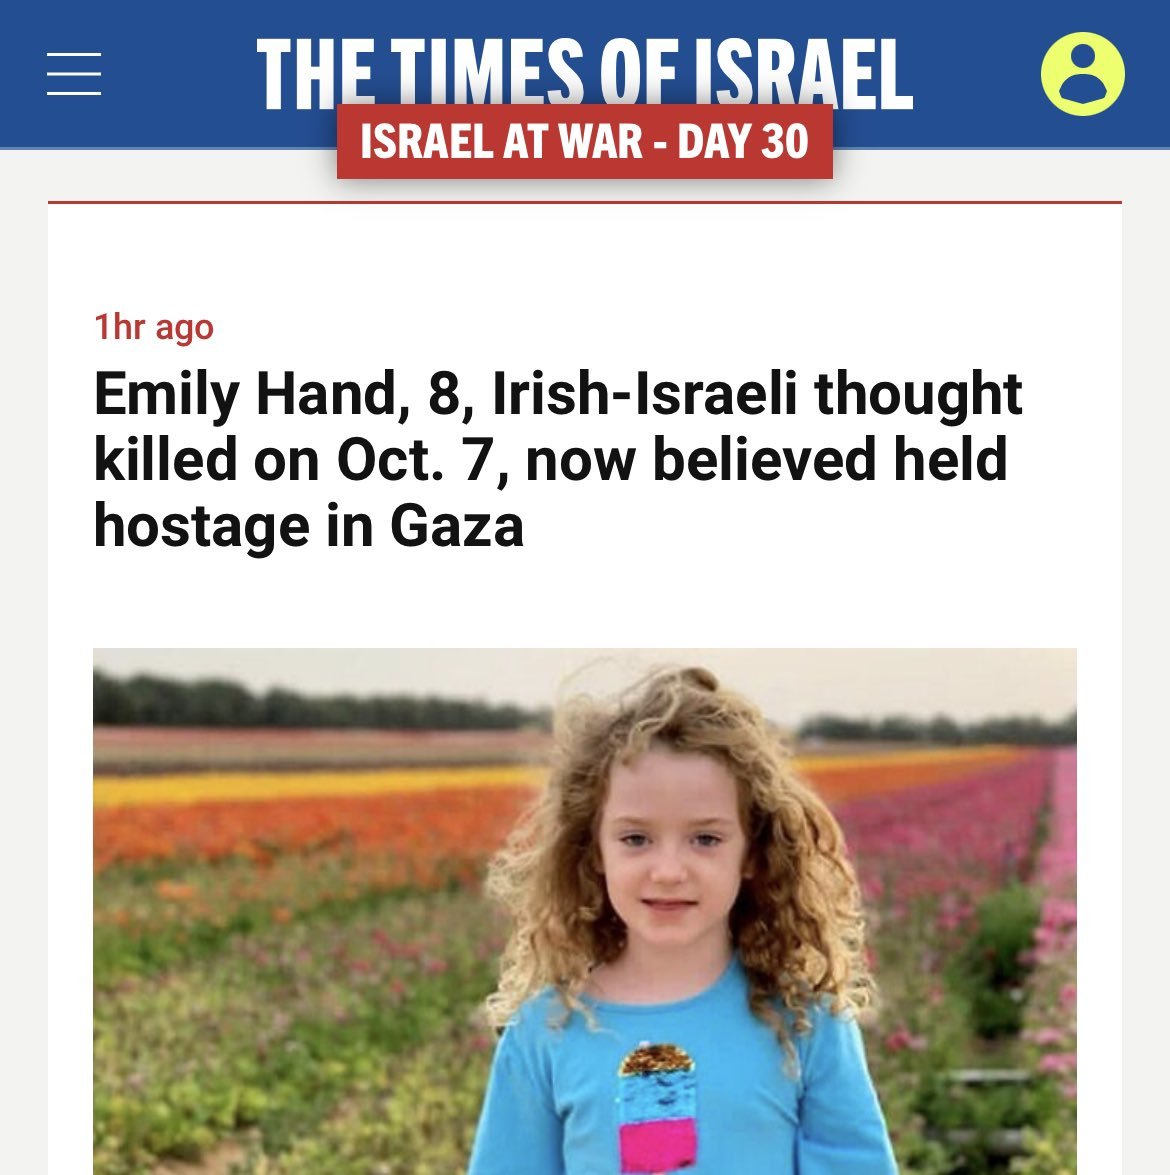 Israel initially claimed they found Emily Hand's dead body, but 30 days later they said she was alive. Today, she returns home. 

Did Israel torment her father for political gain?